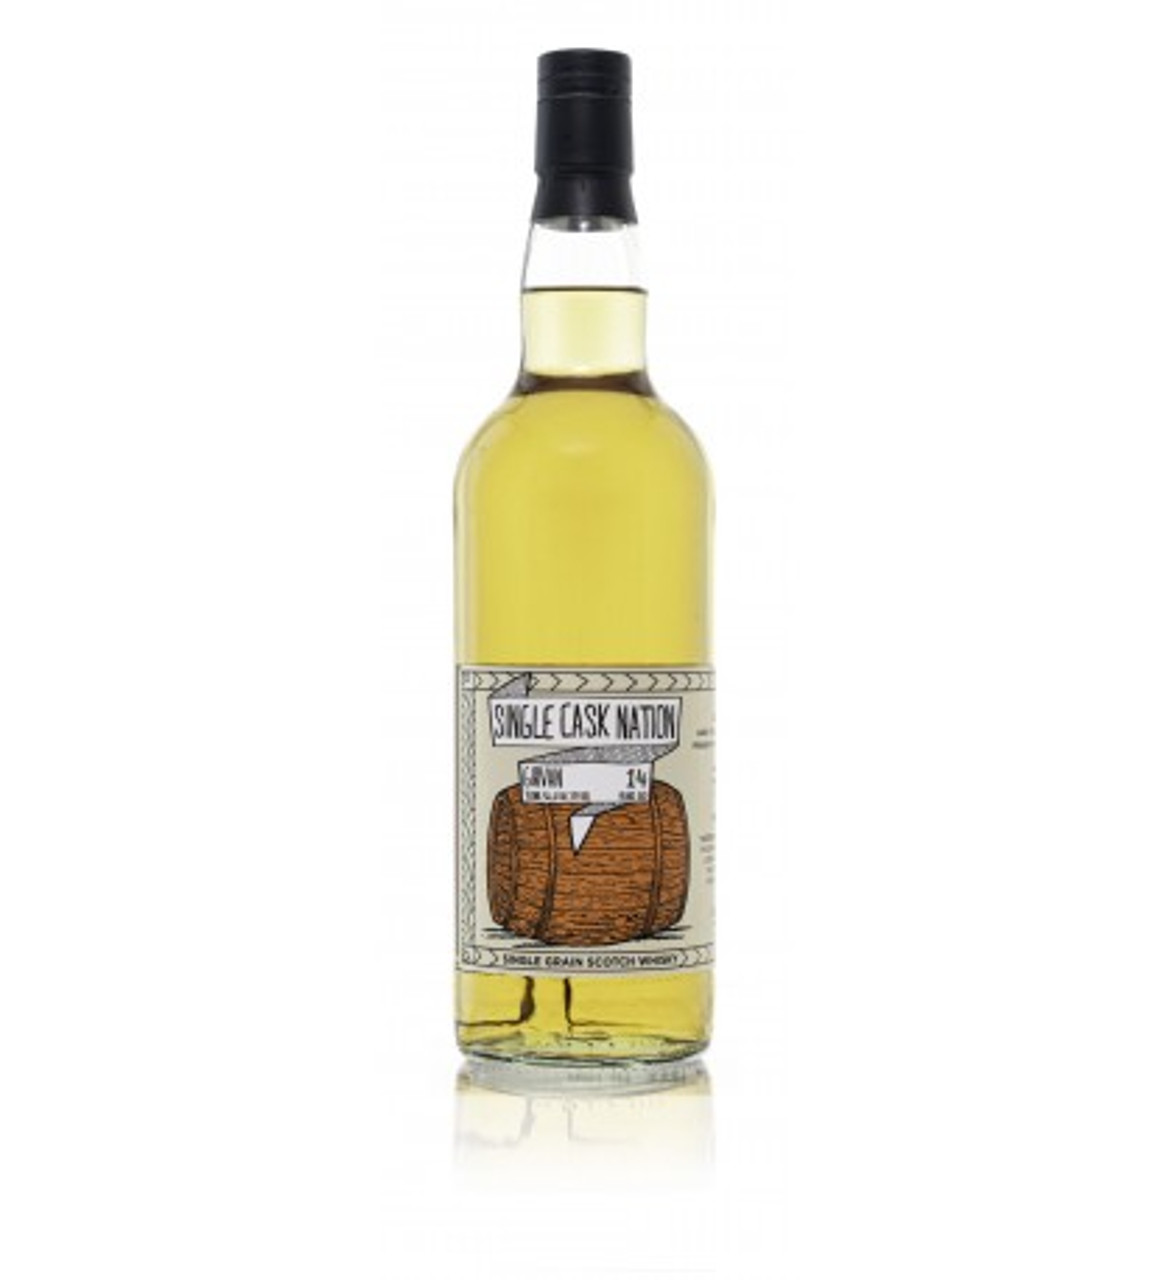 Girvan 14 Year Old, 2006, by Single Cask Nation